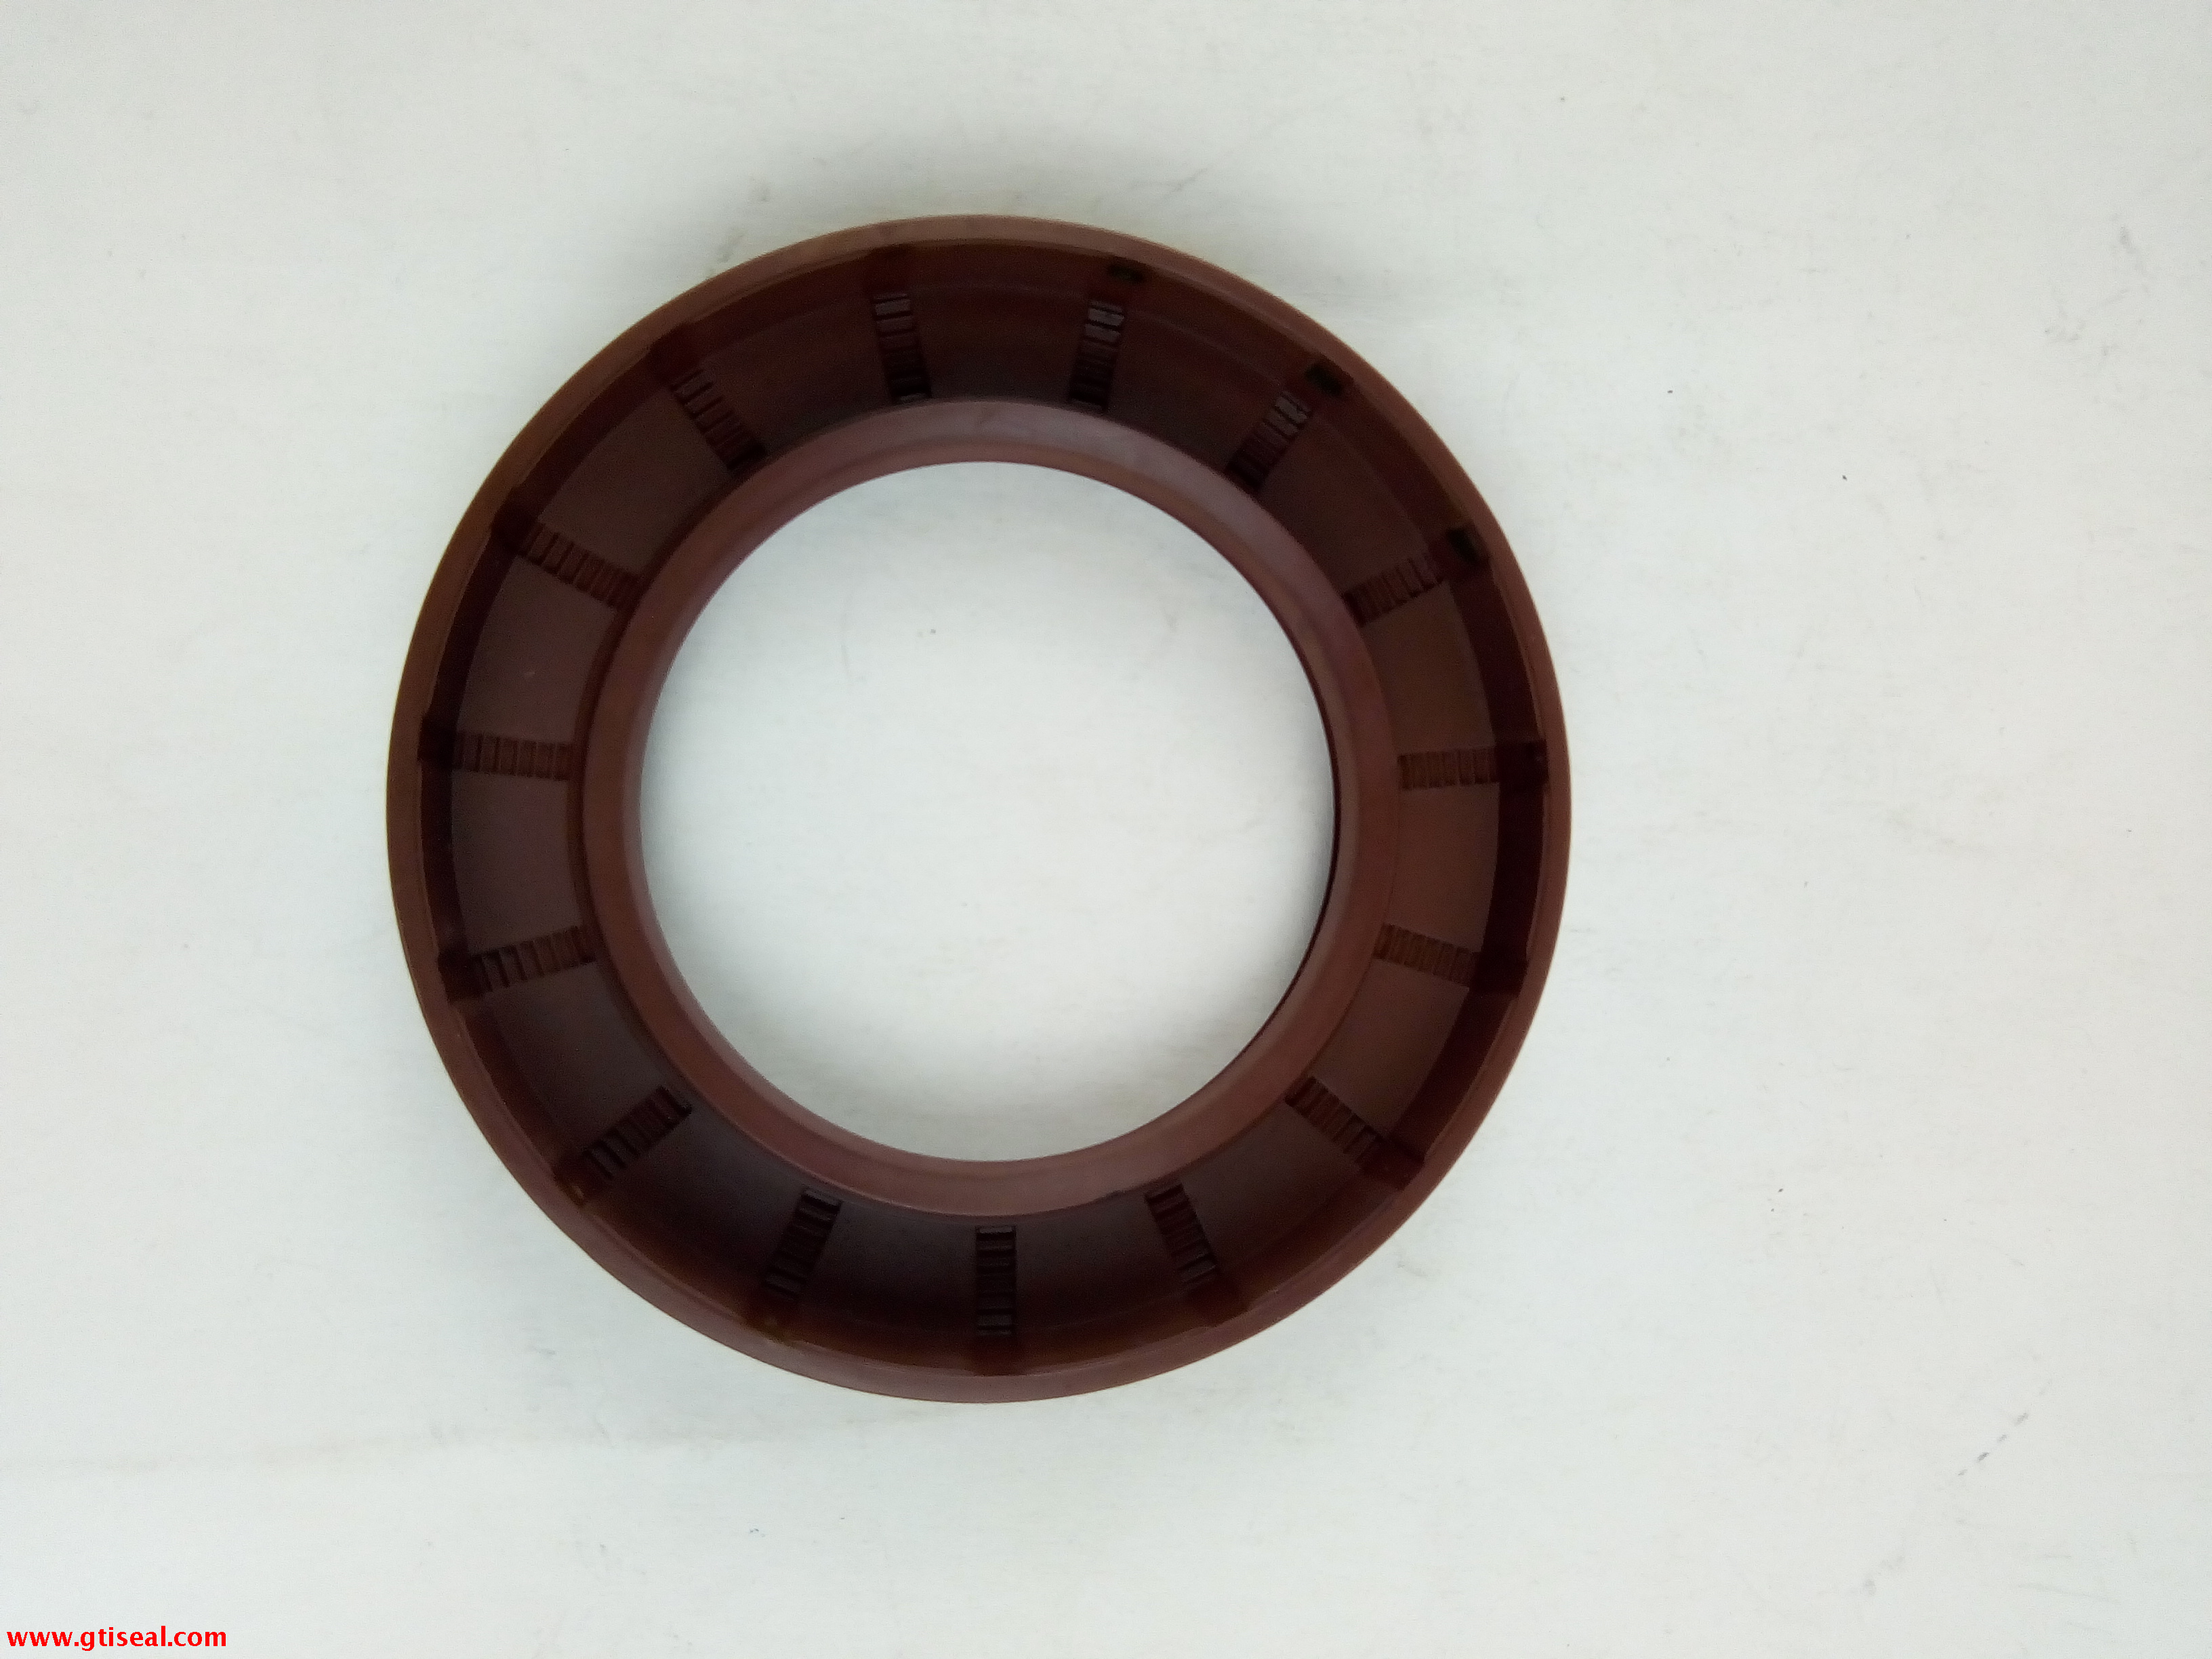 long use life national oil seal replacement for engine crankshaft